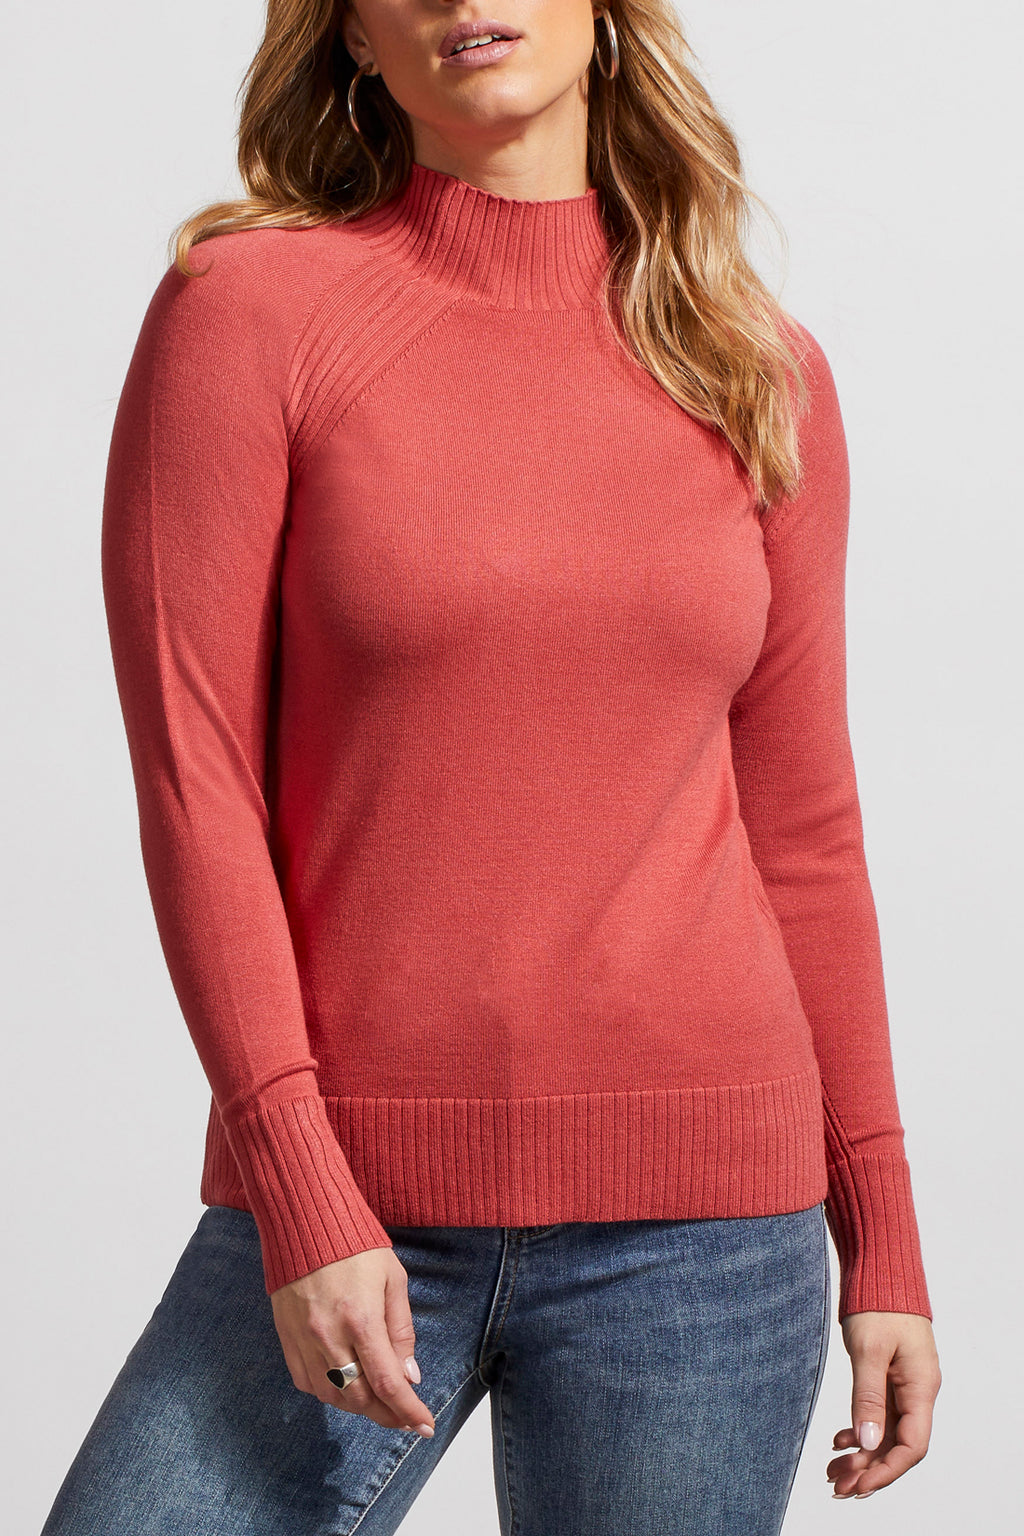 Tribal Fashions Funnel Neck Sweater - Chili Red